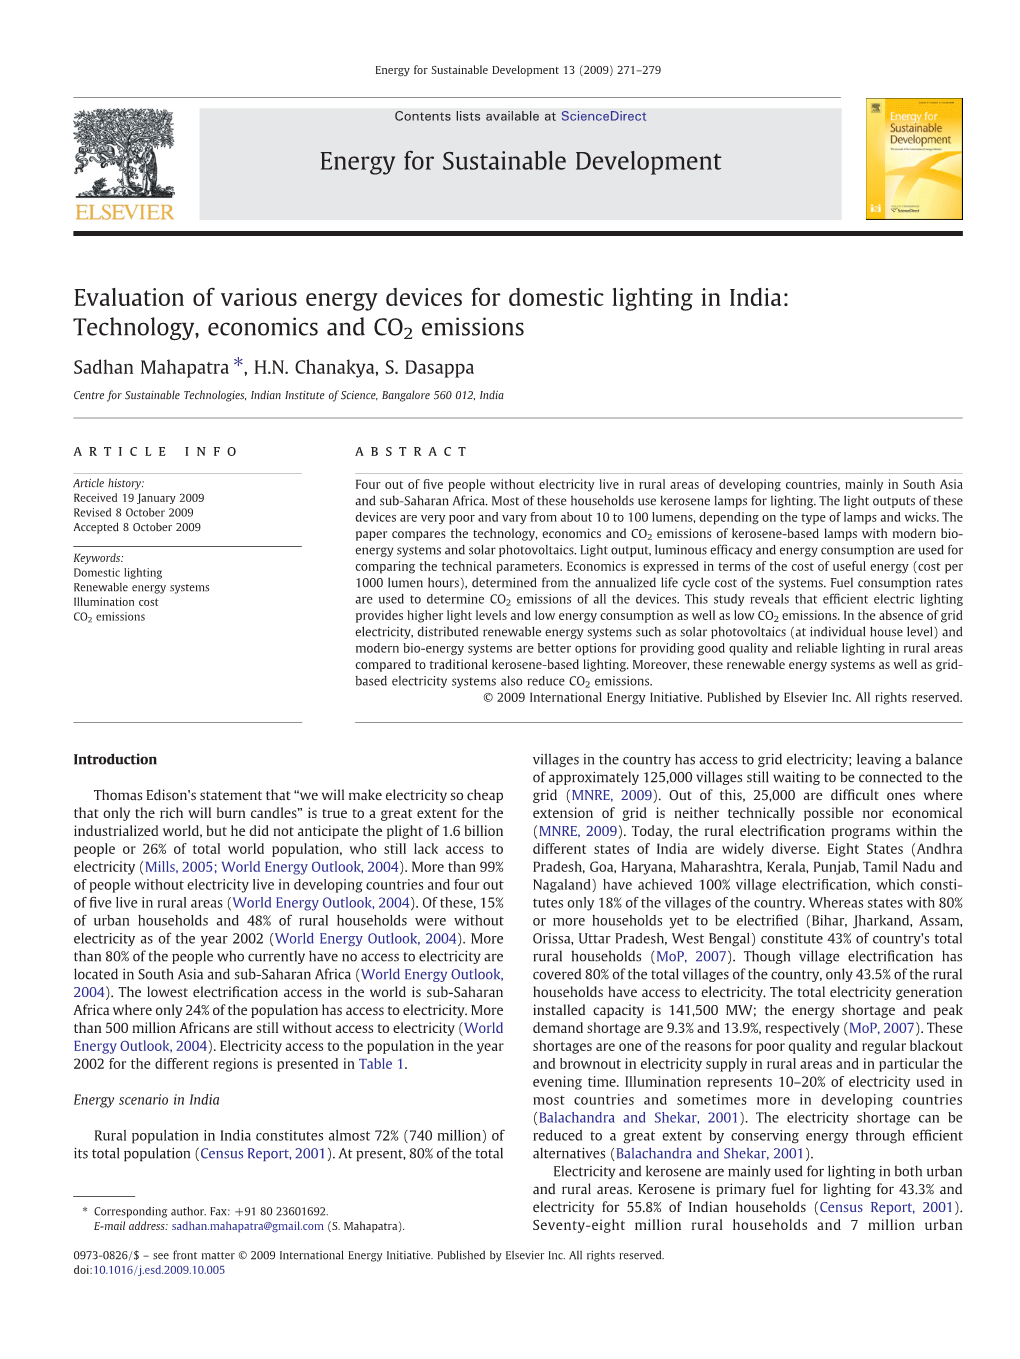 Evaluation of Various Energy Devices for Domestic Lighting.Pdf